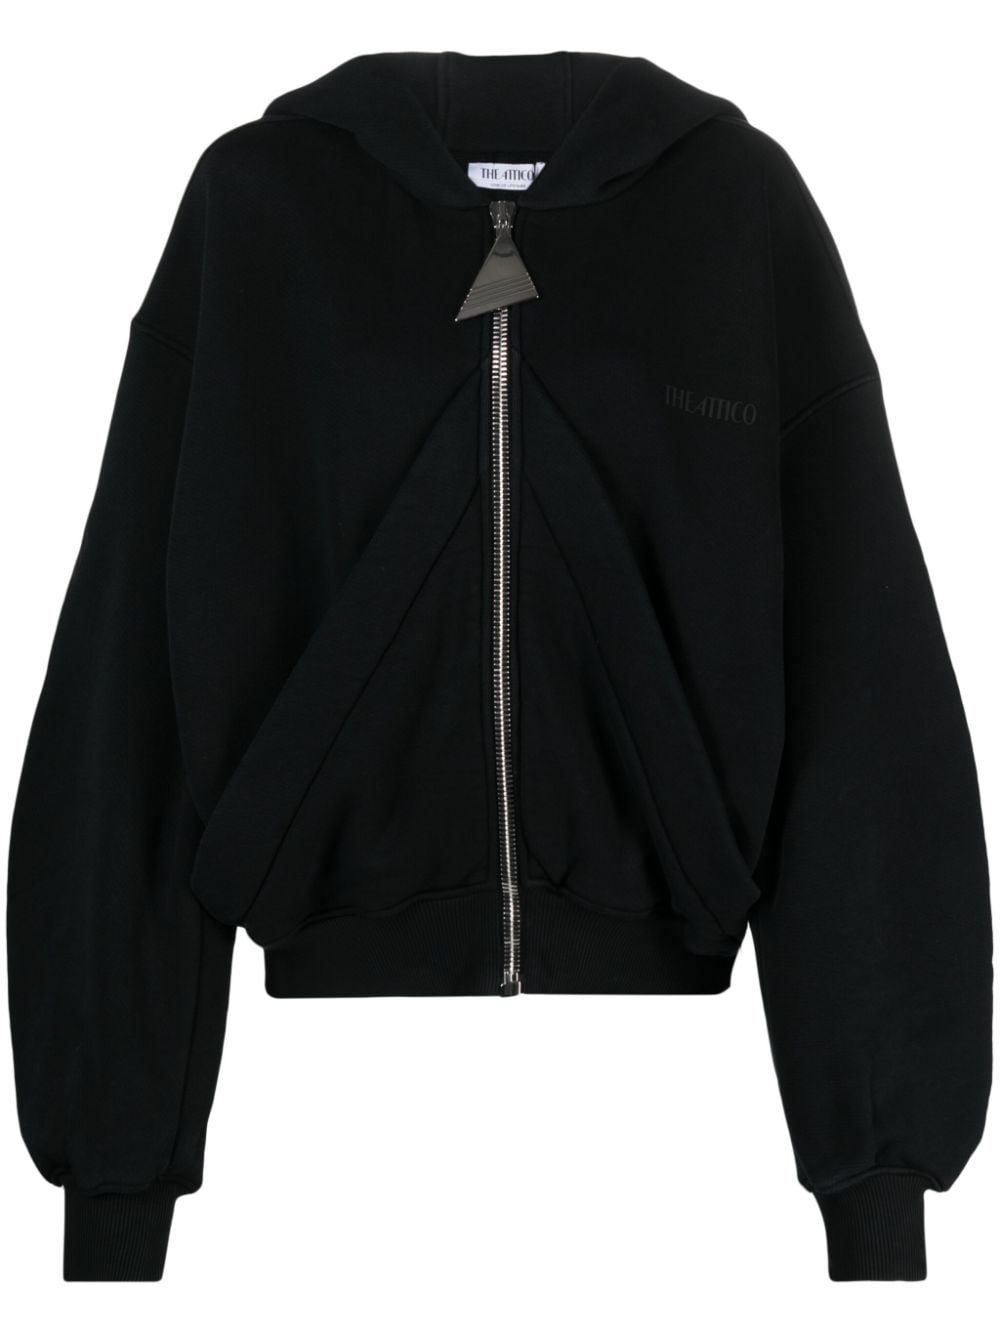 THE ATTICO Stylish and Comfortable Zip-Up Hoodie for Women